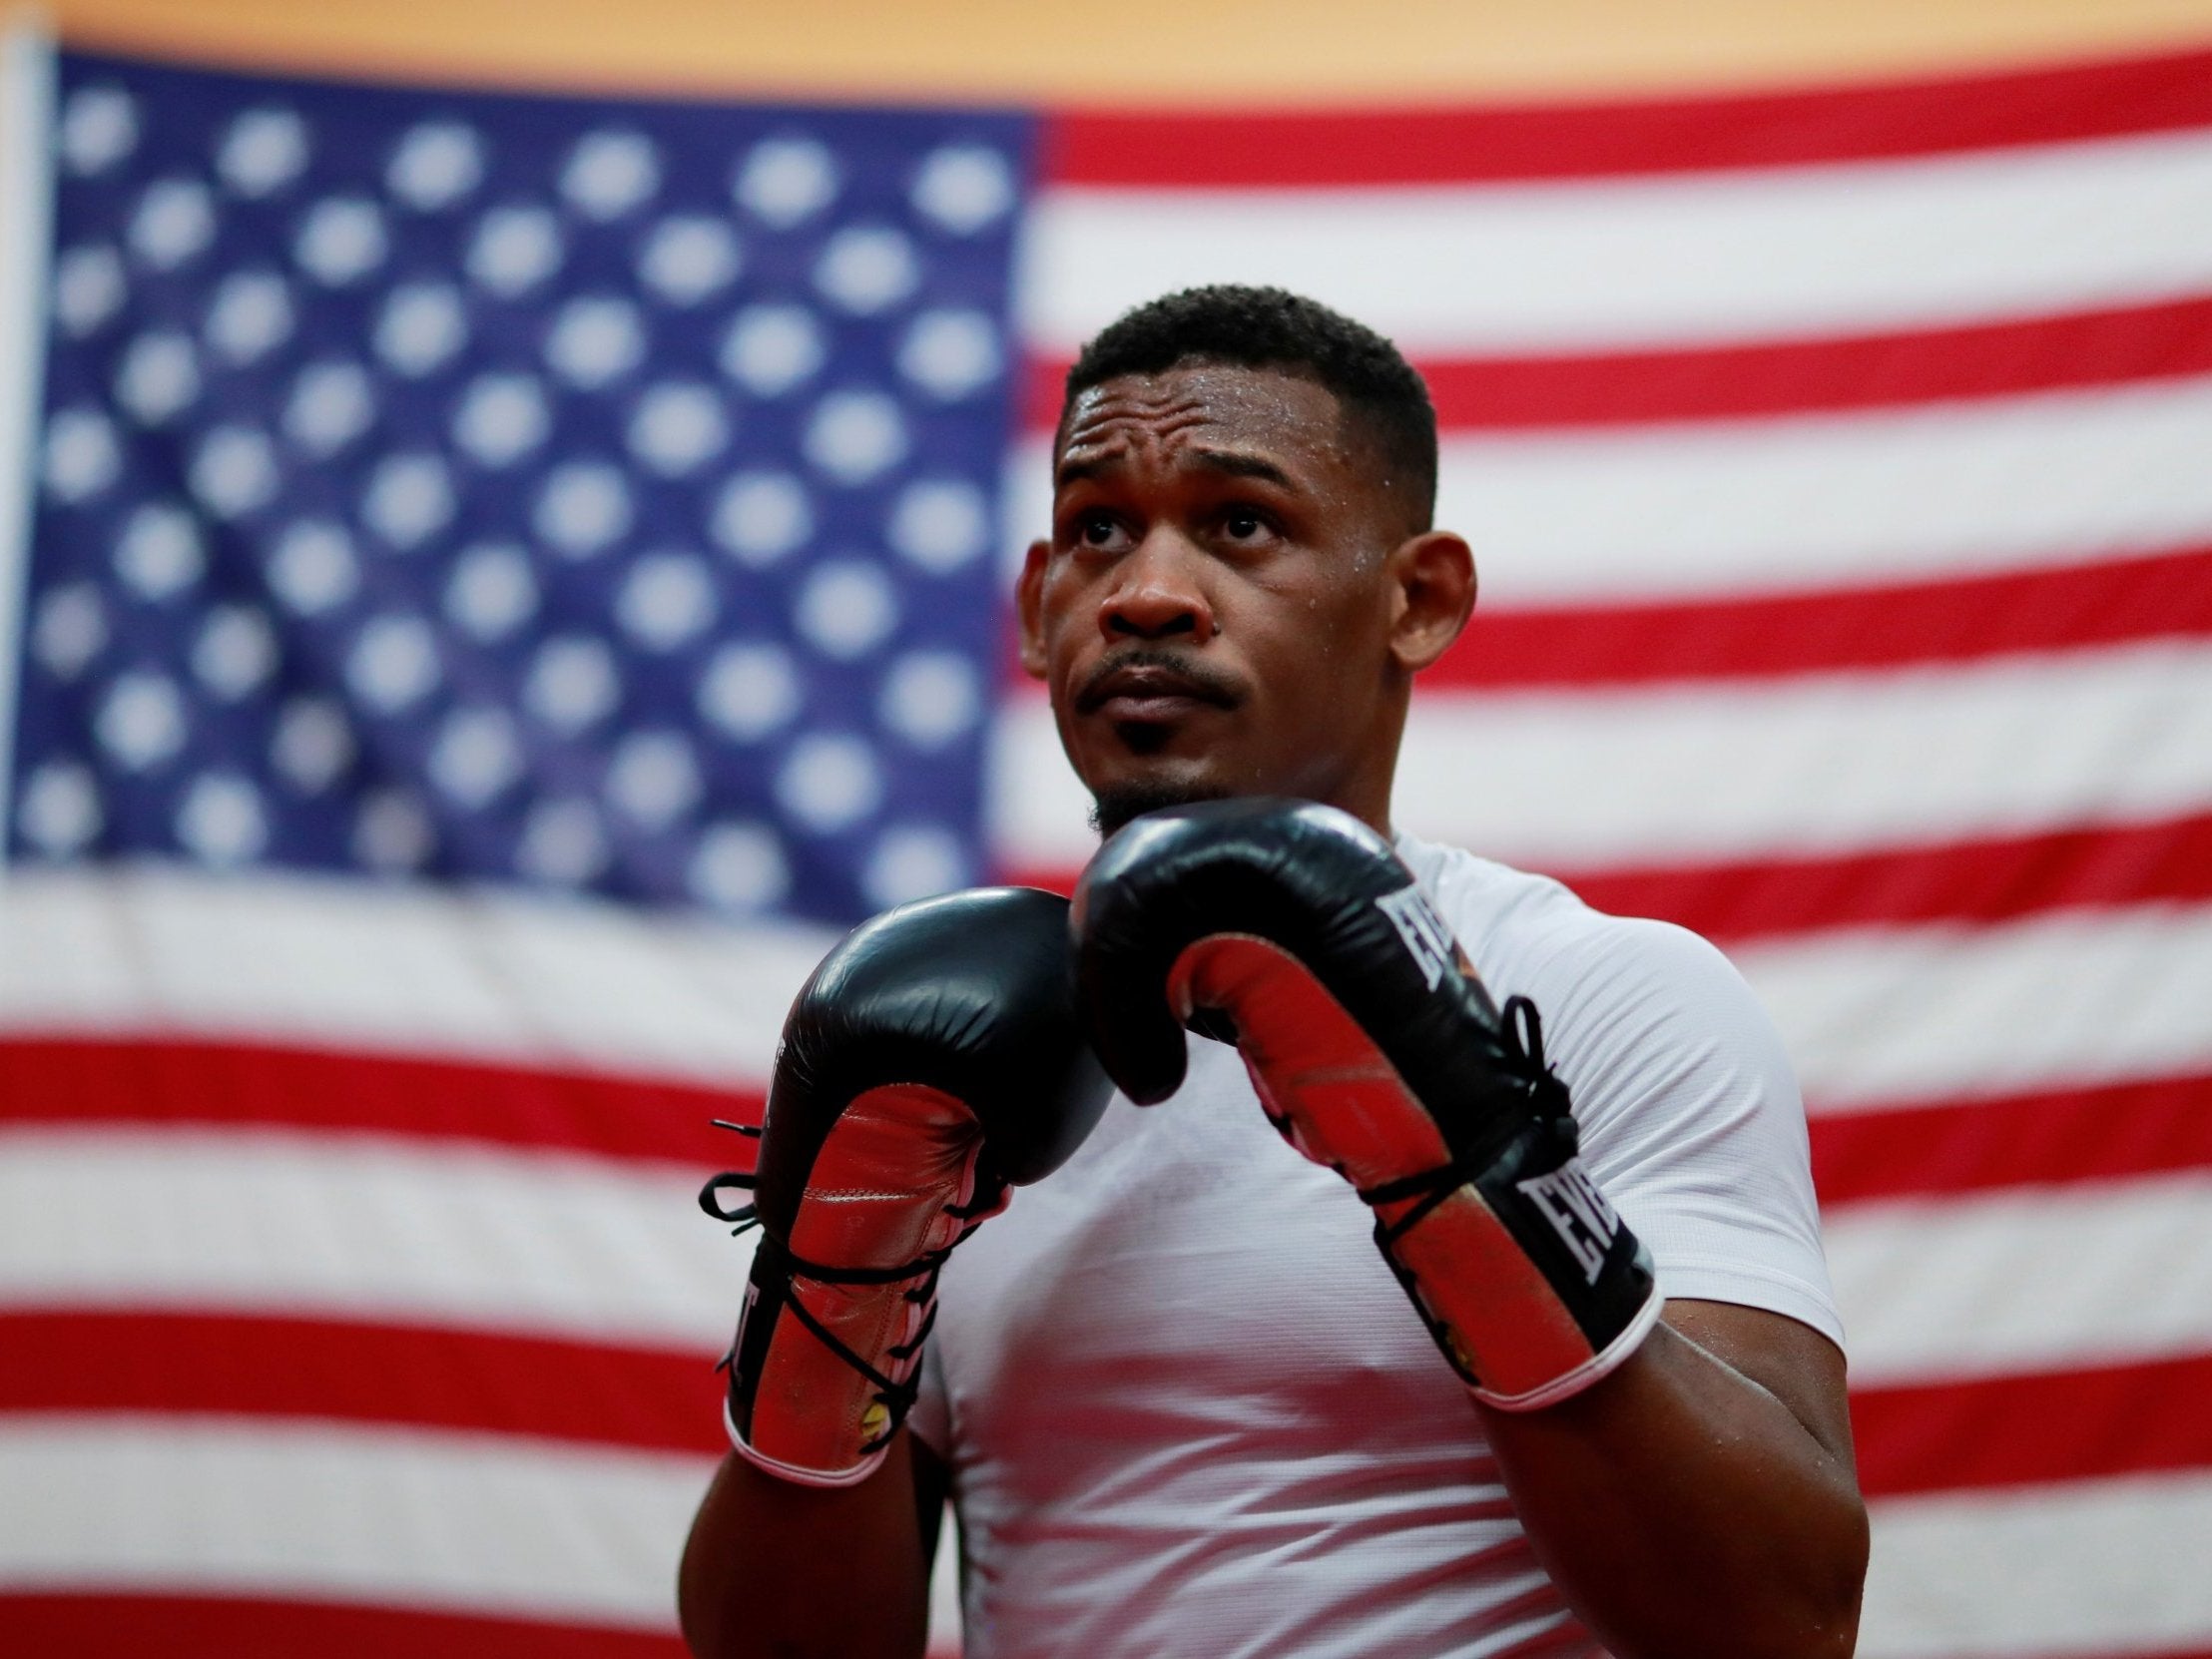 Daniel Jacobs is confident he can cause an upset